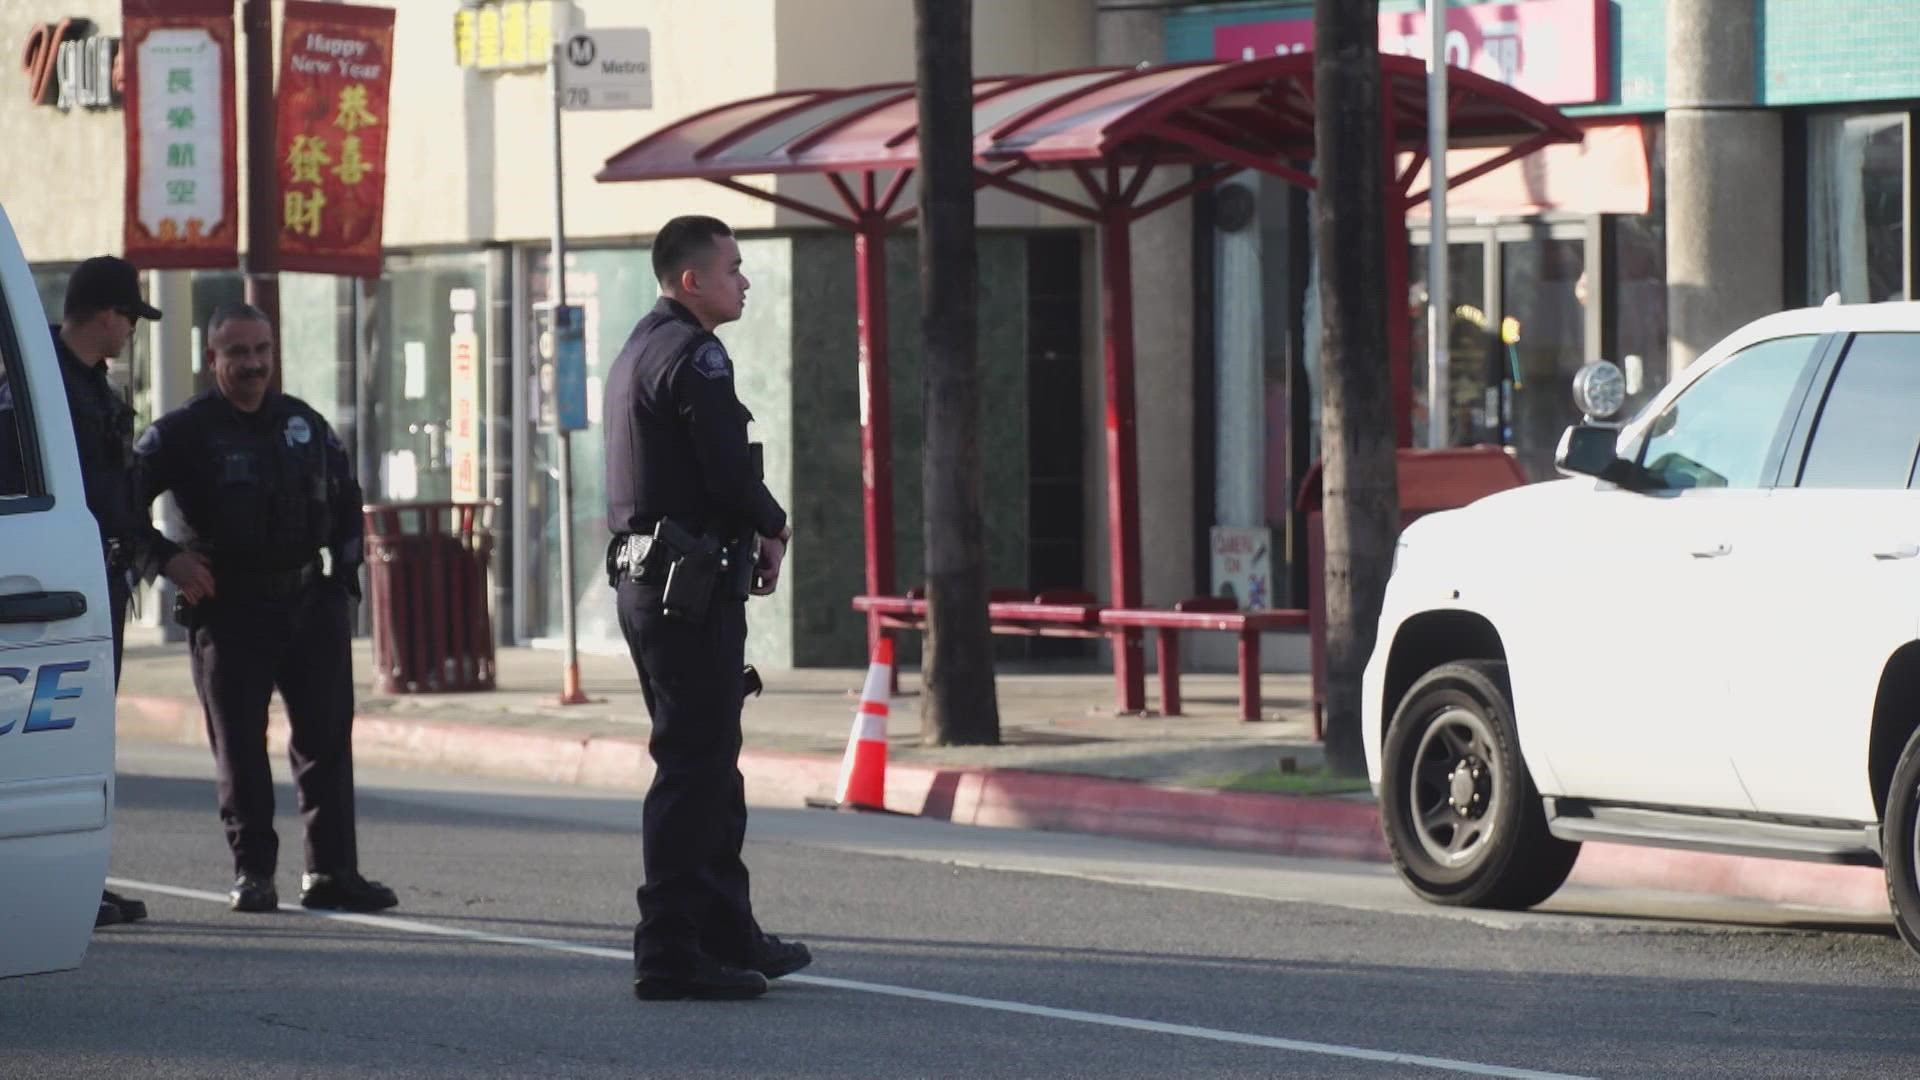 Monterey Park is left to ask "why" after a shooter opened fire on a Lunar New Year celebration. Even as details come to light, it's been difficult to process.